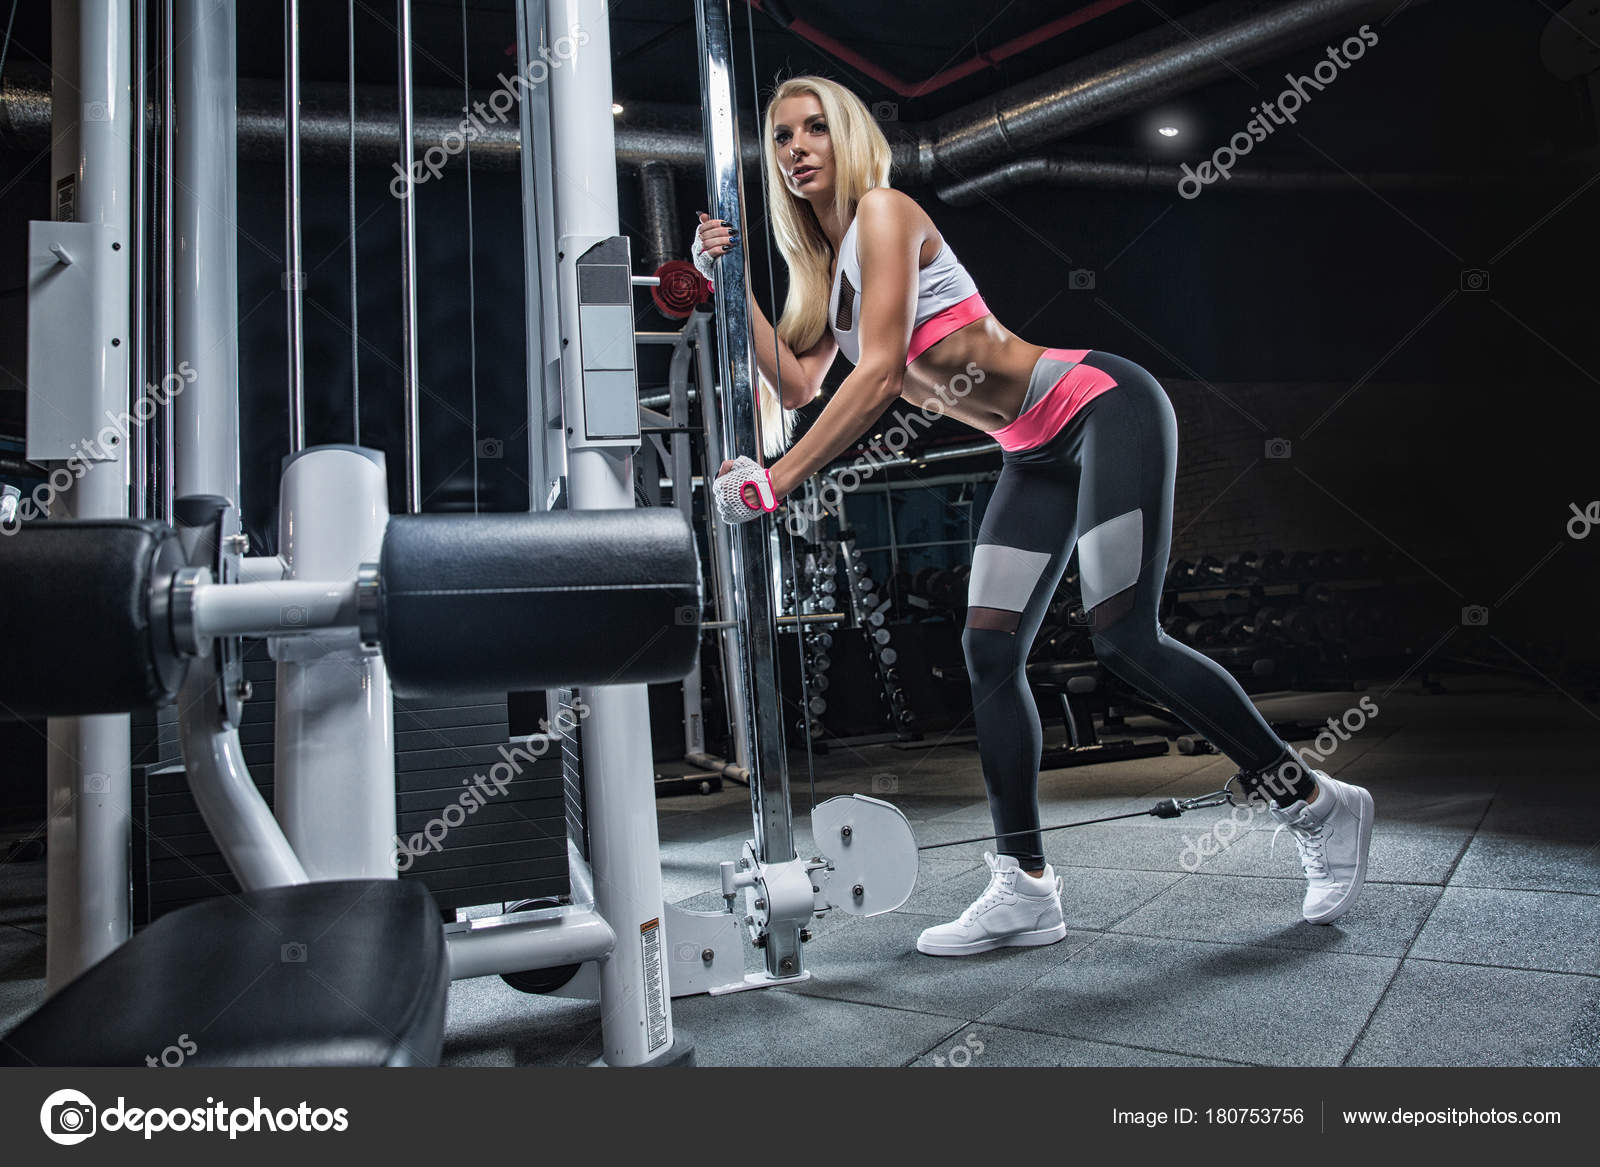 Exercise equipment that actually works. A pretty young blonde